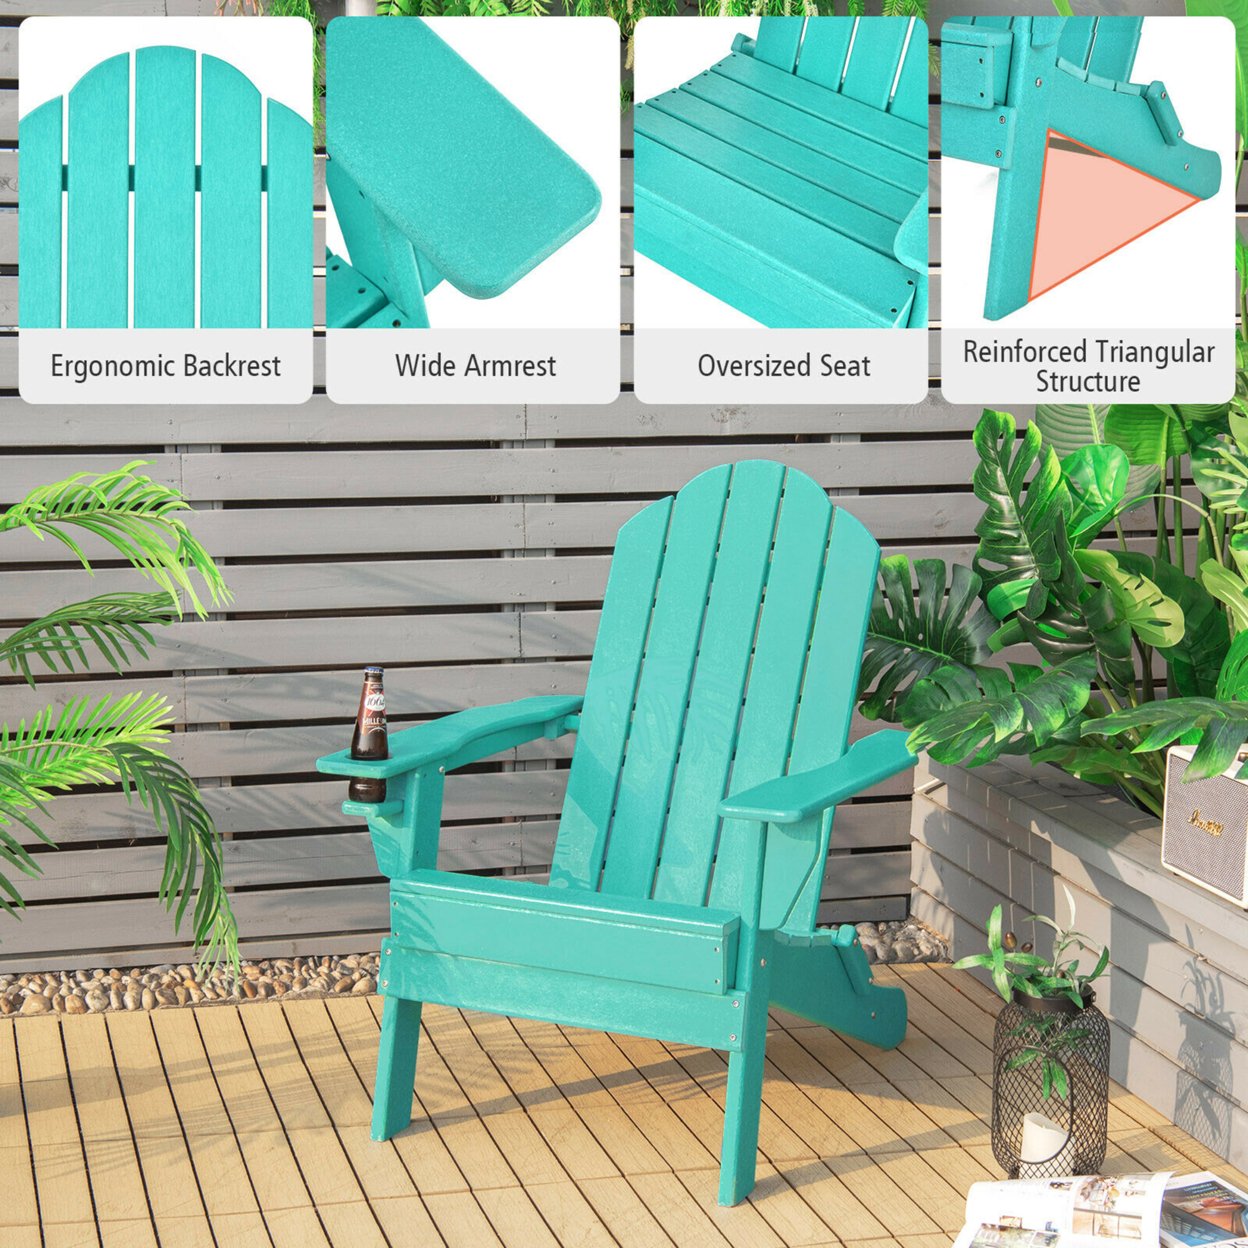 4PCS Patio Folding Adirondack Chair Weather Resistant Cup Holder Yard - Turquoise